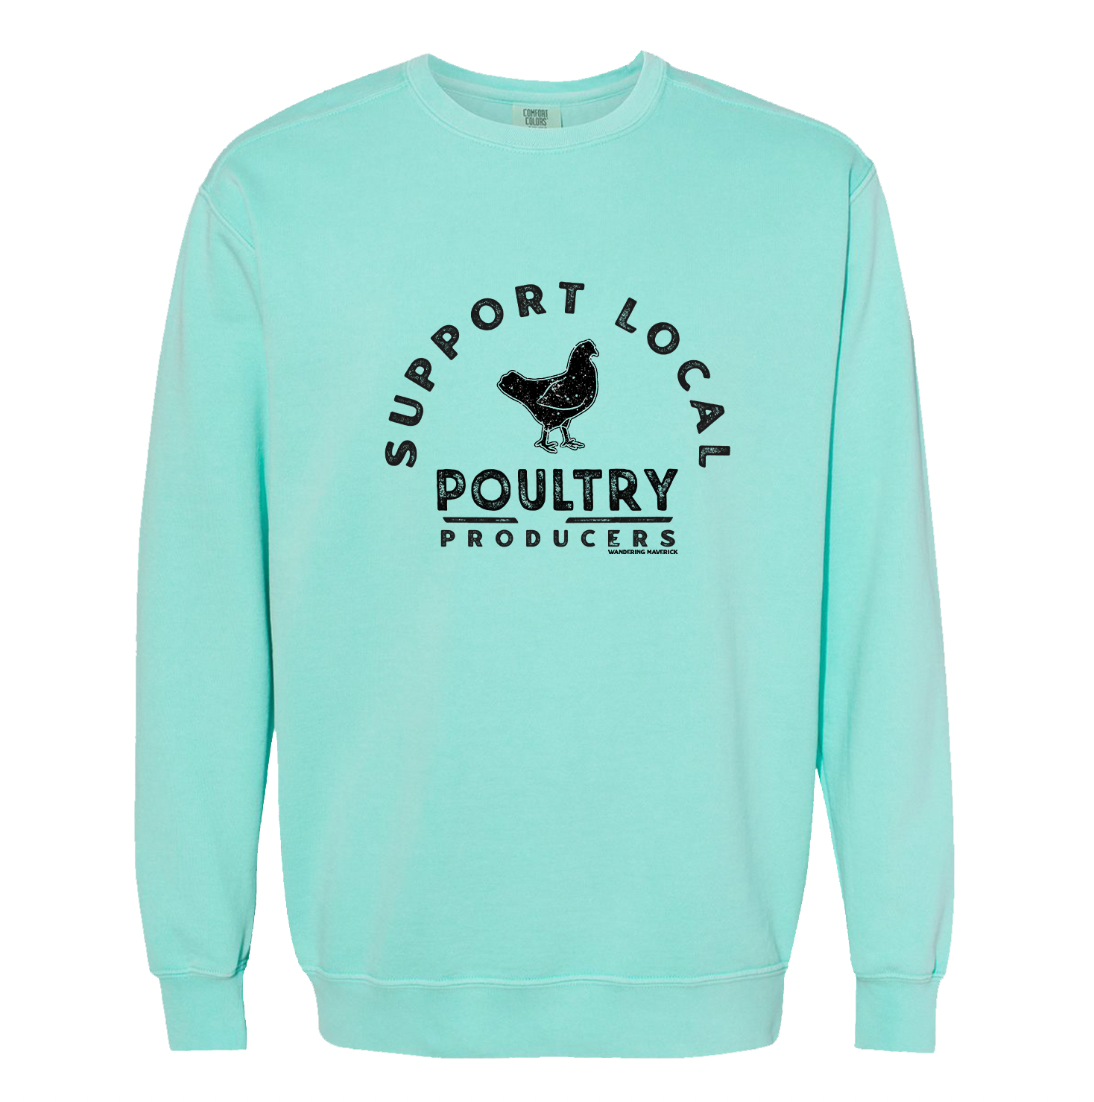 Support Local Poultry Producers Crewneck (S-3XL) - Multiple Colors!